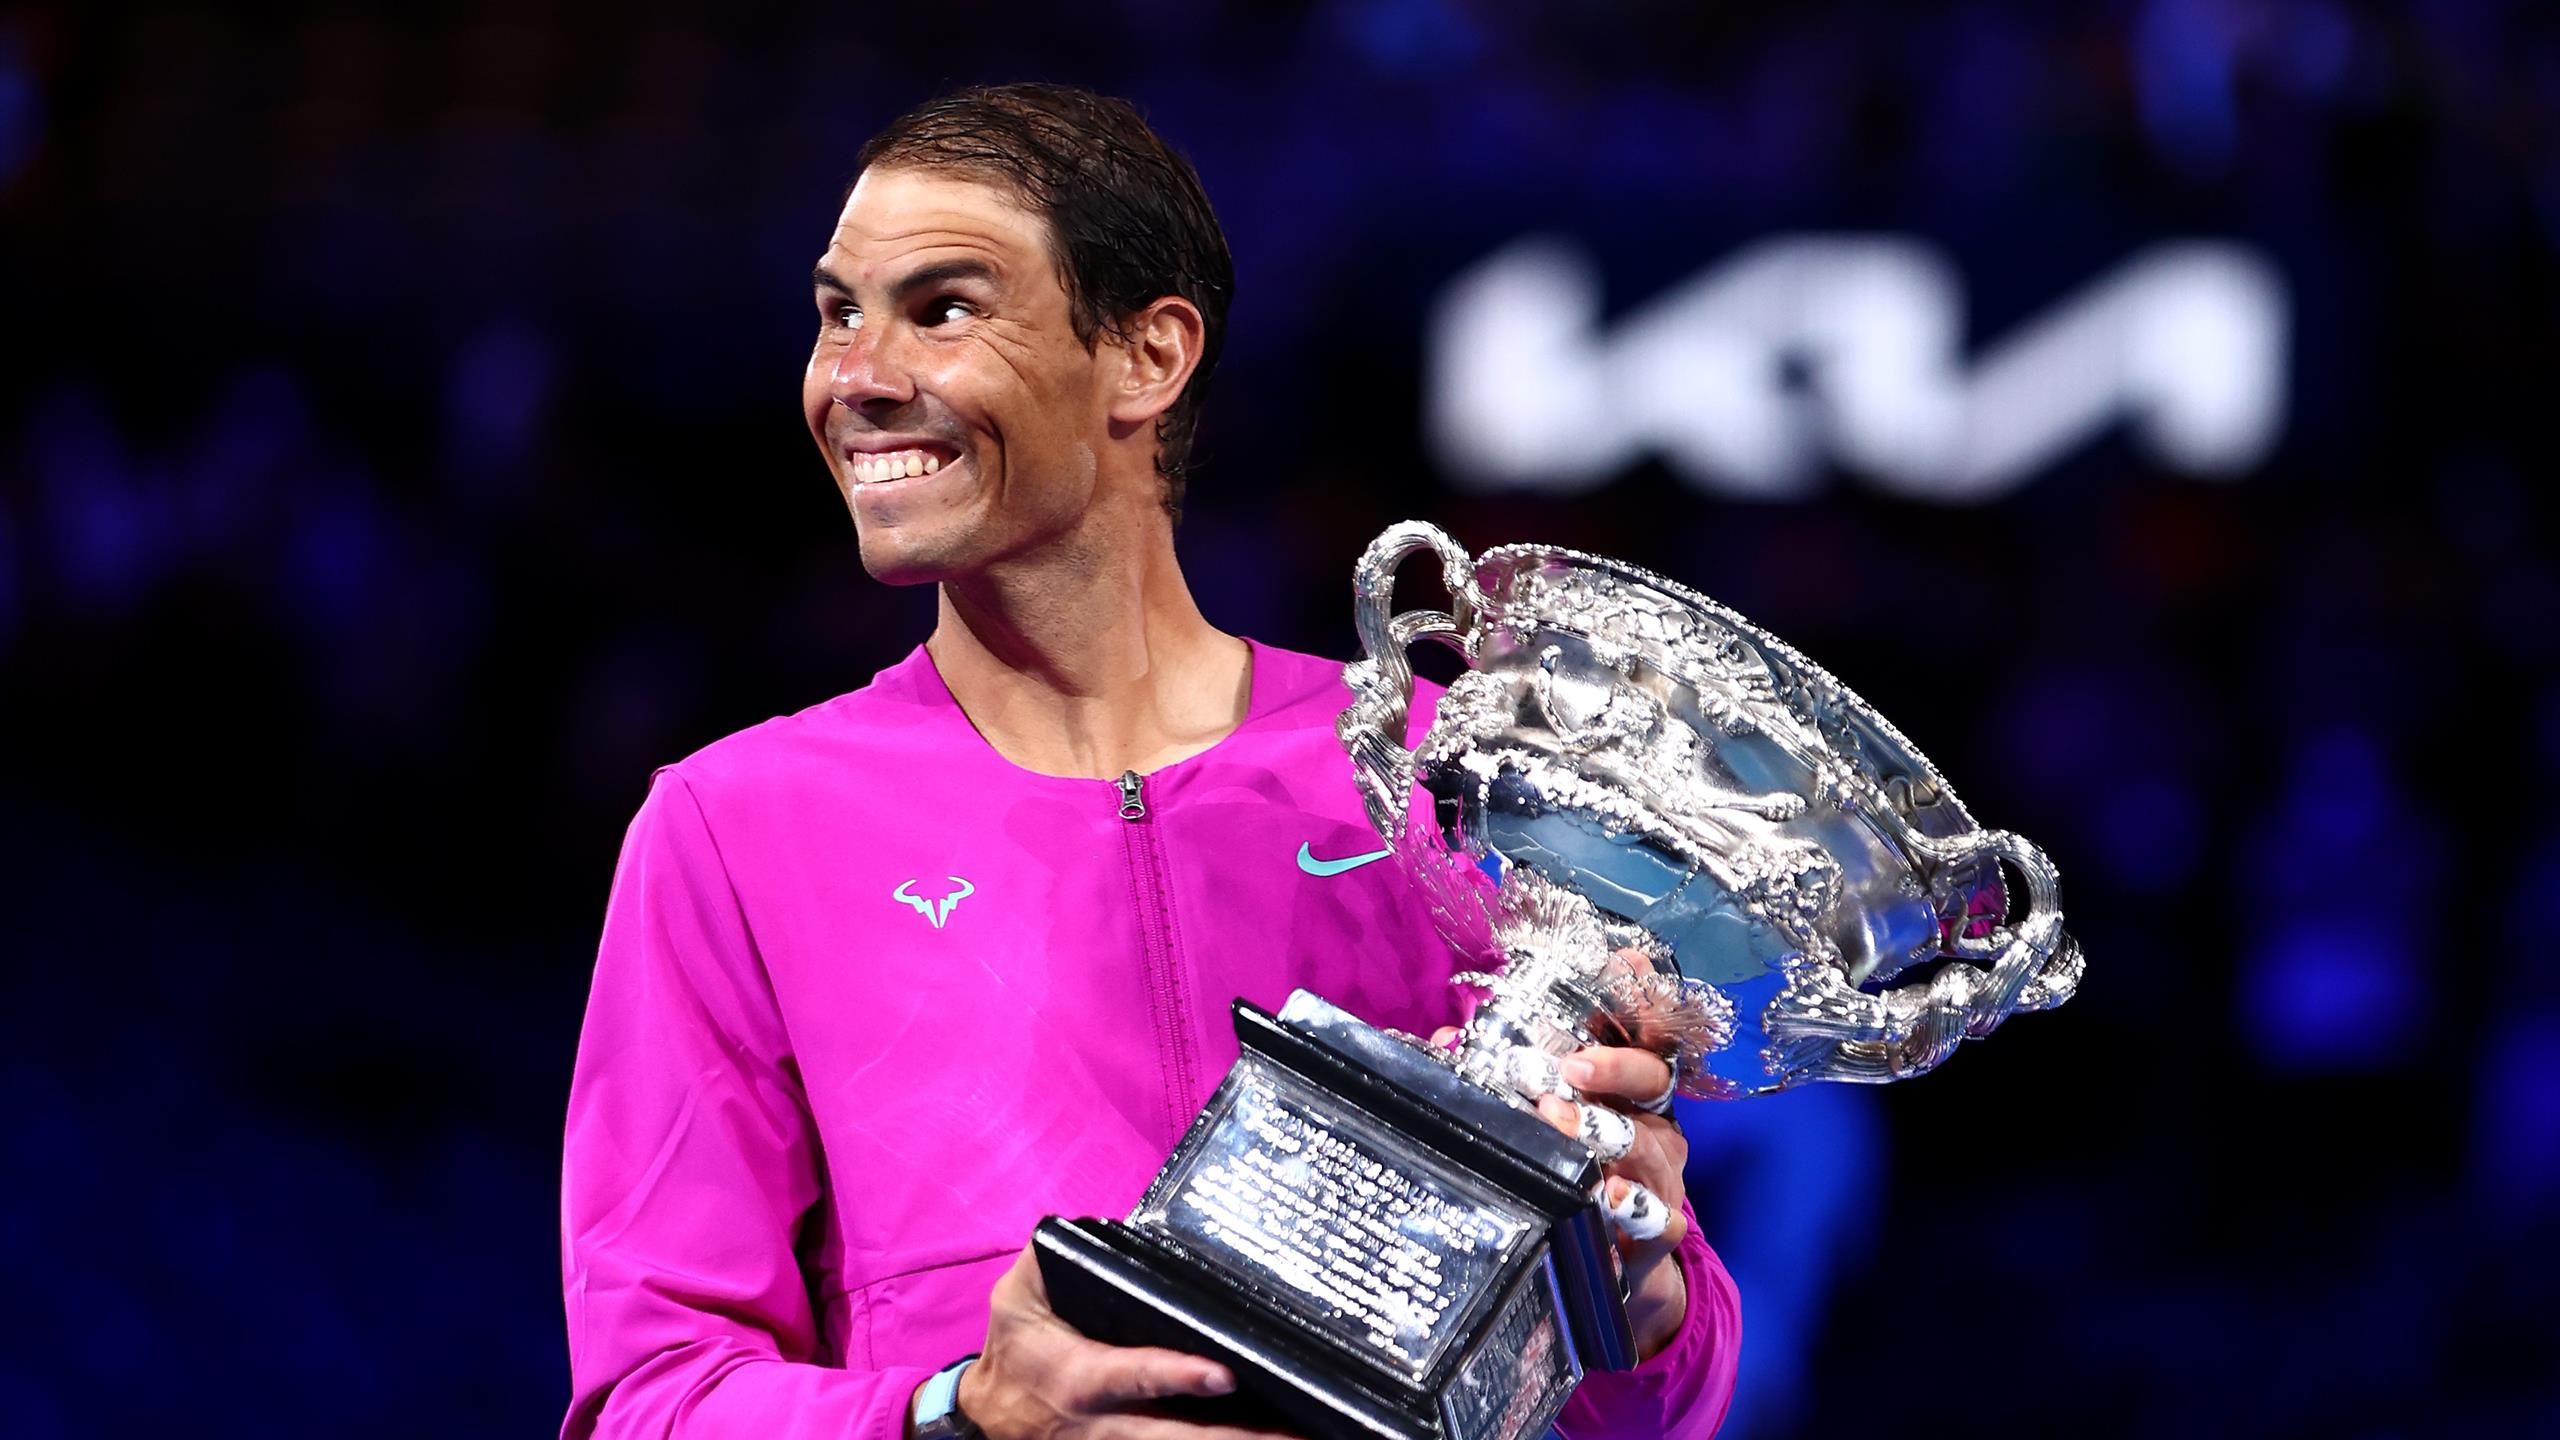 Australian Open 2023 What is the prize money for men and women? How